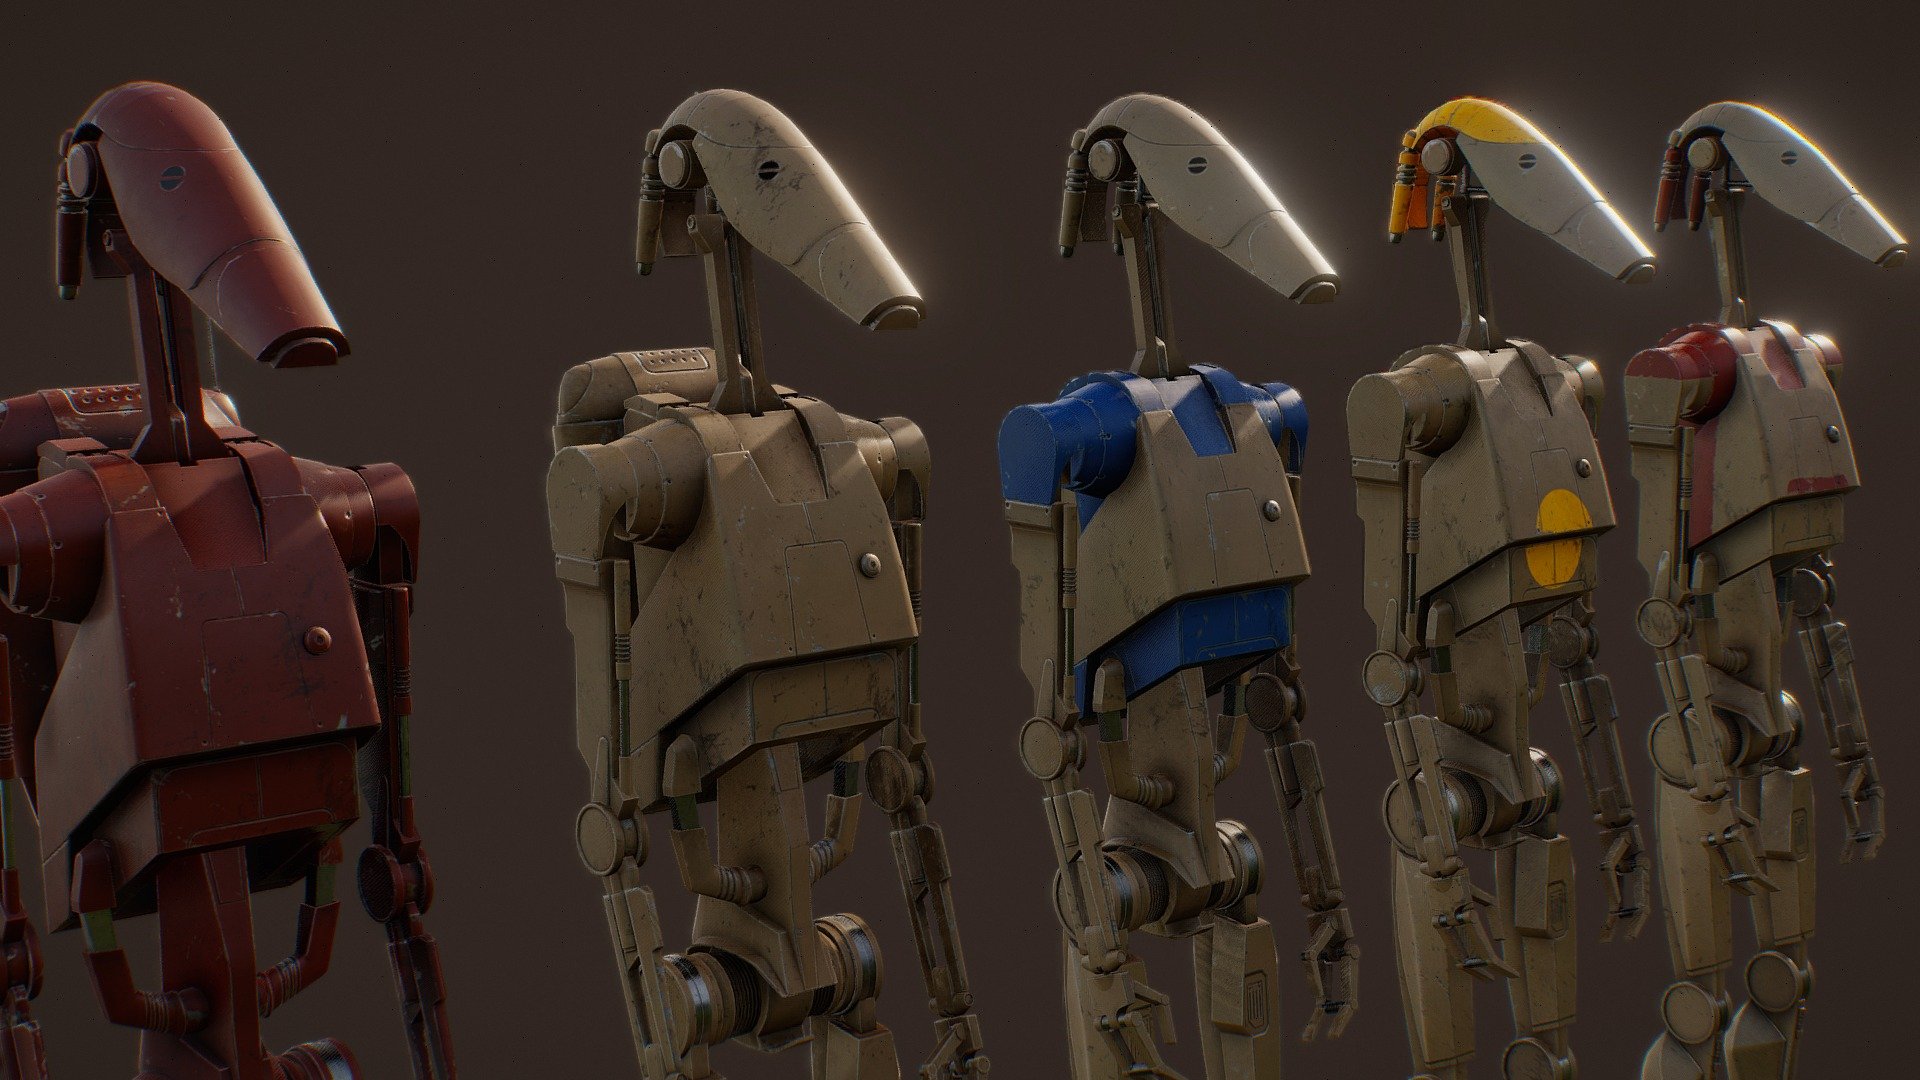 This droid comes with 2 modes: full with back pack and naked back, 5 color schemes.

The pack includes:





3ds max scene (retro compatibility up to 2020)




Basic CAT Rig 




FBX models + Bonus model: Blaster




4K/2K textures












 - Star Wars Droid - Low poly - Buy Royalty Free 3D model by 1k0 3d model